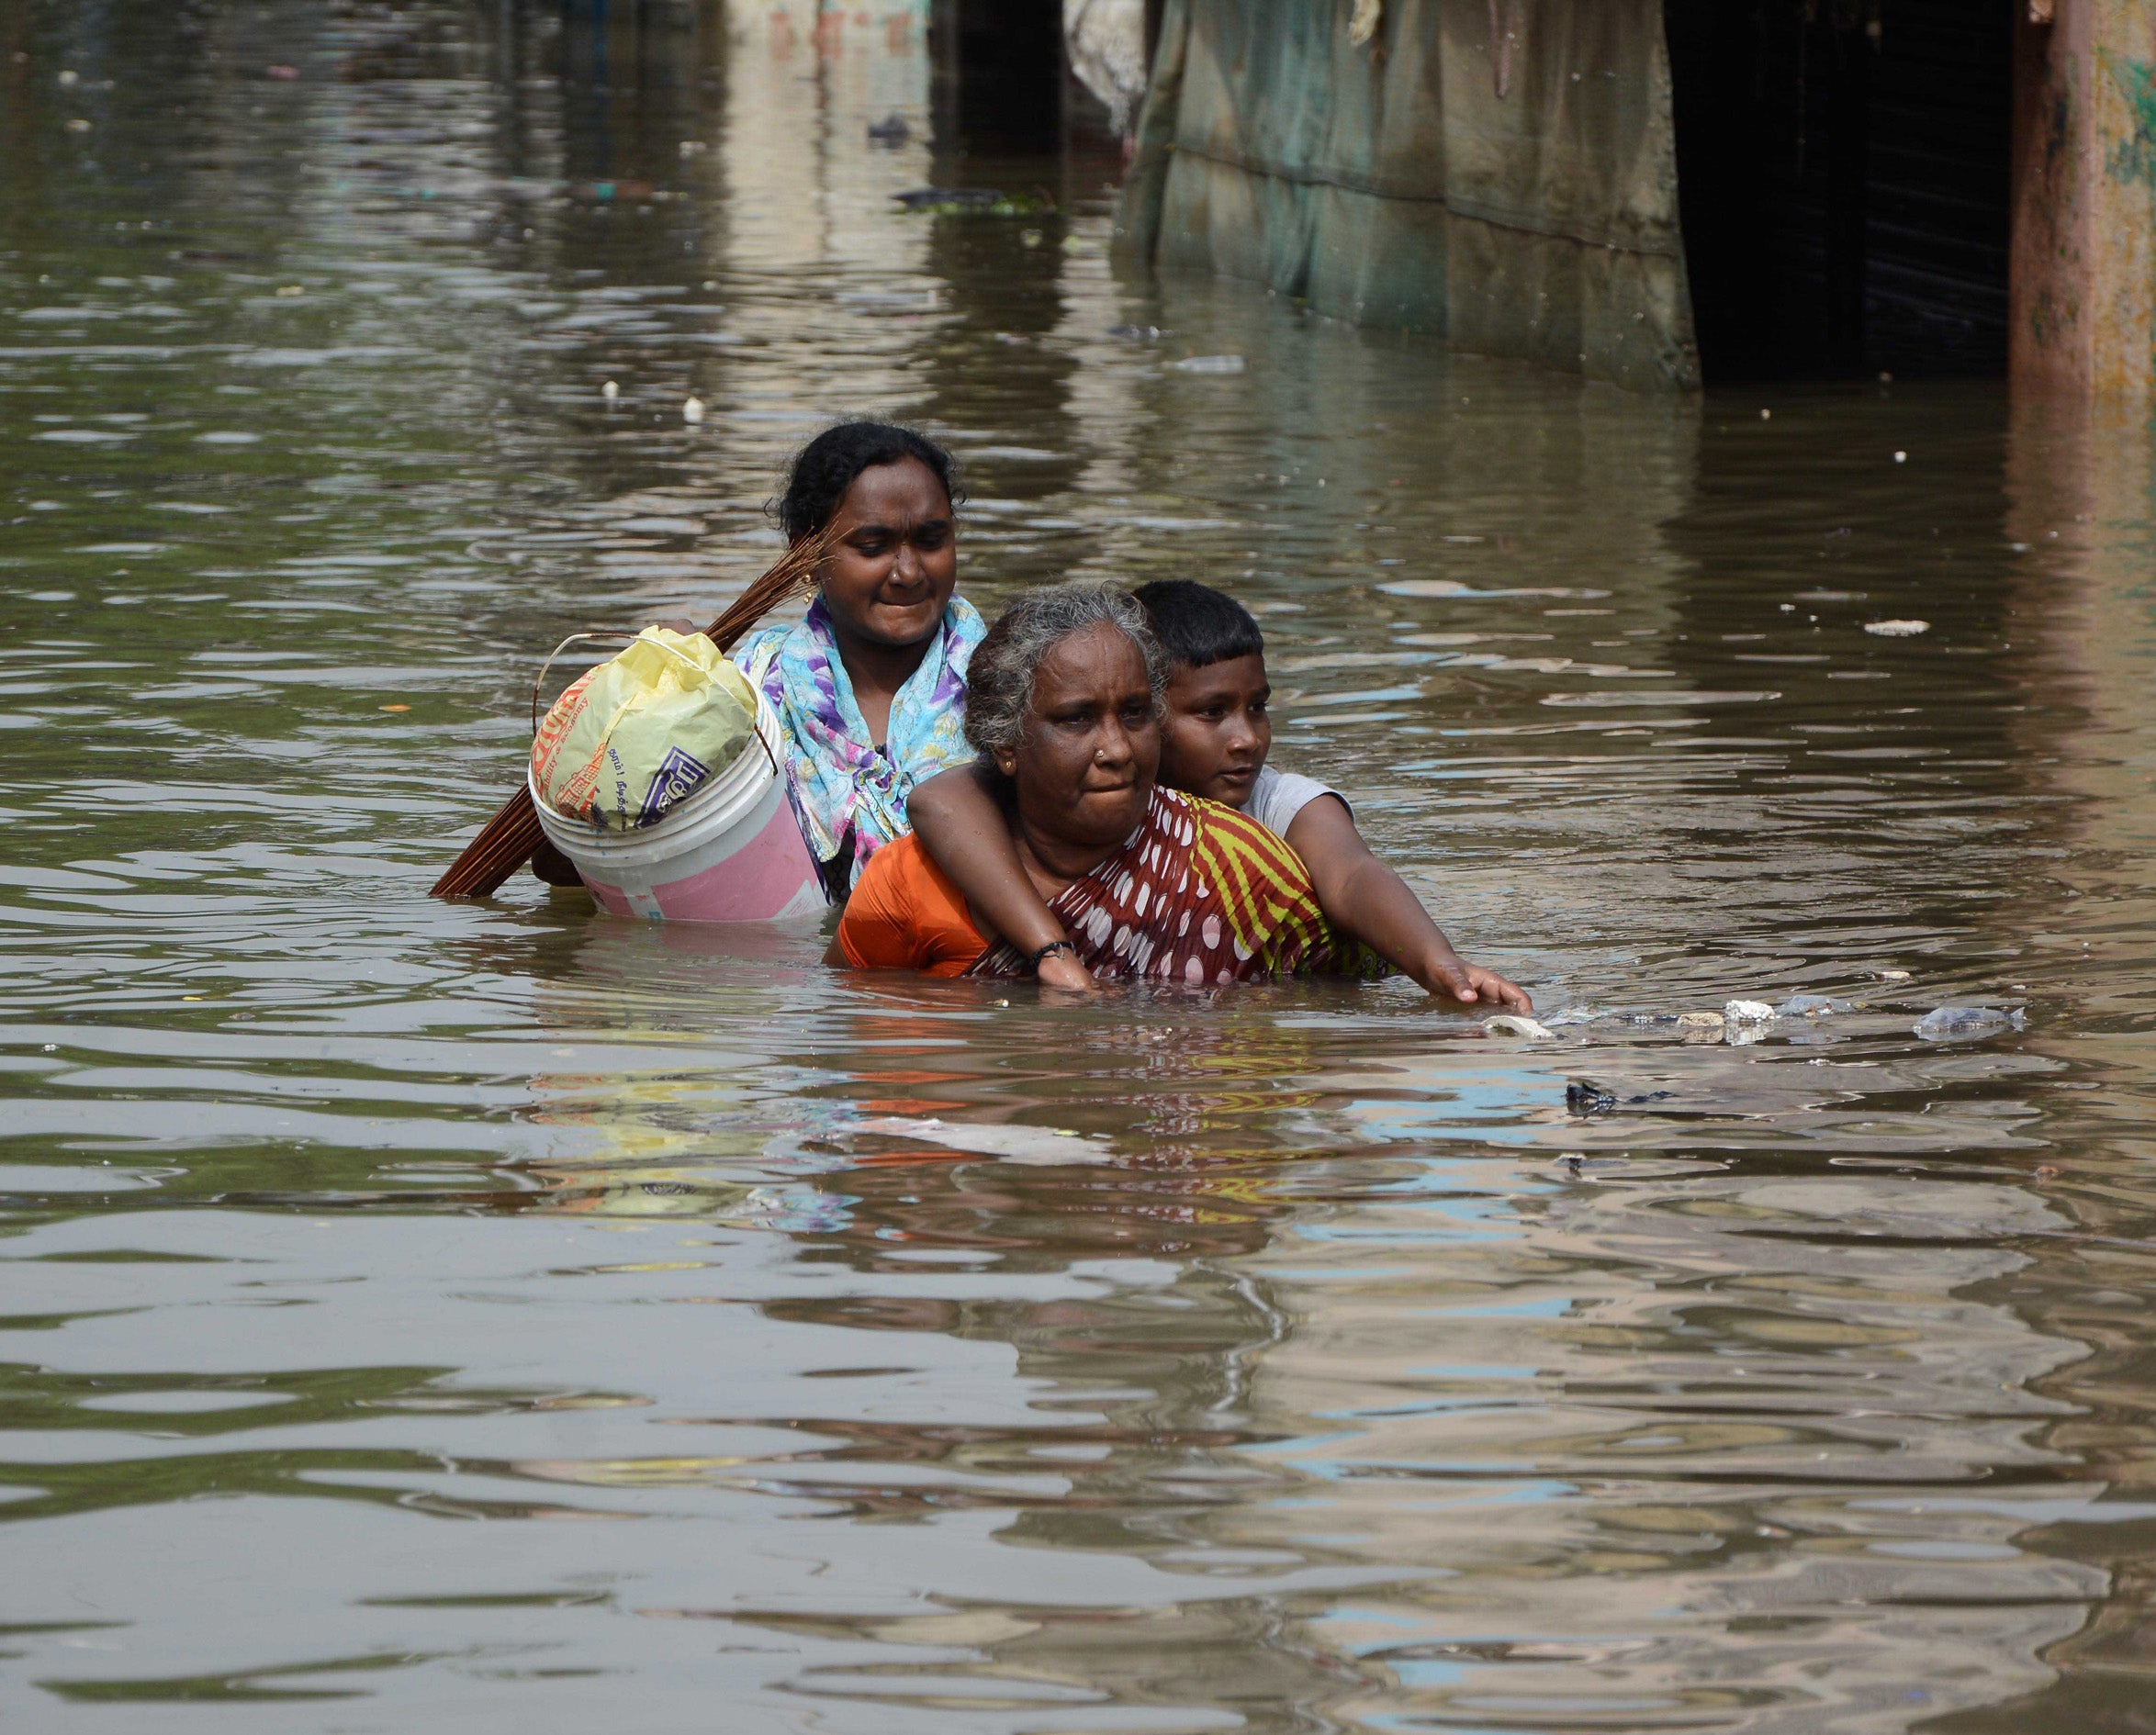 The El Niño effect is said to have contributed to the serious flooding in Chennai, India